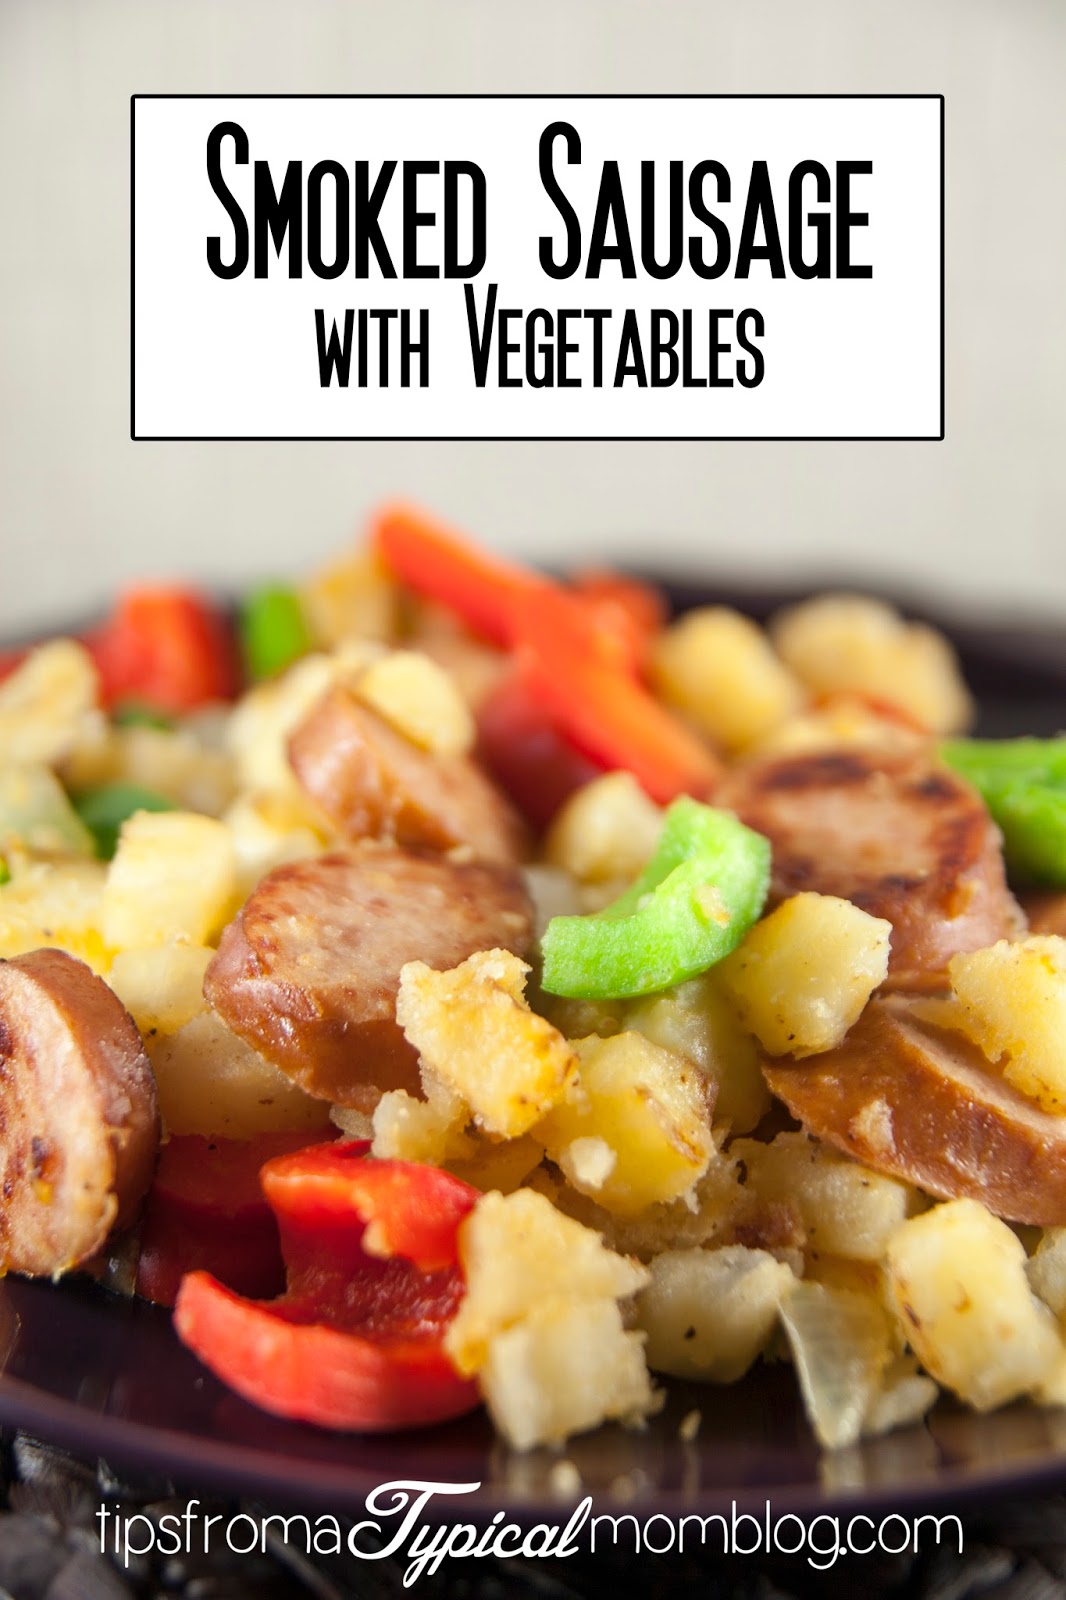 Smoked Sausage with Vegetables easy and fast family friendly dinner. From Tips From a Typical Mom.